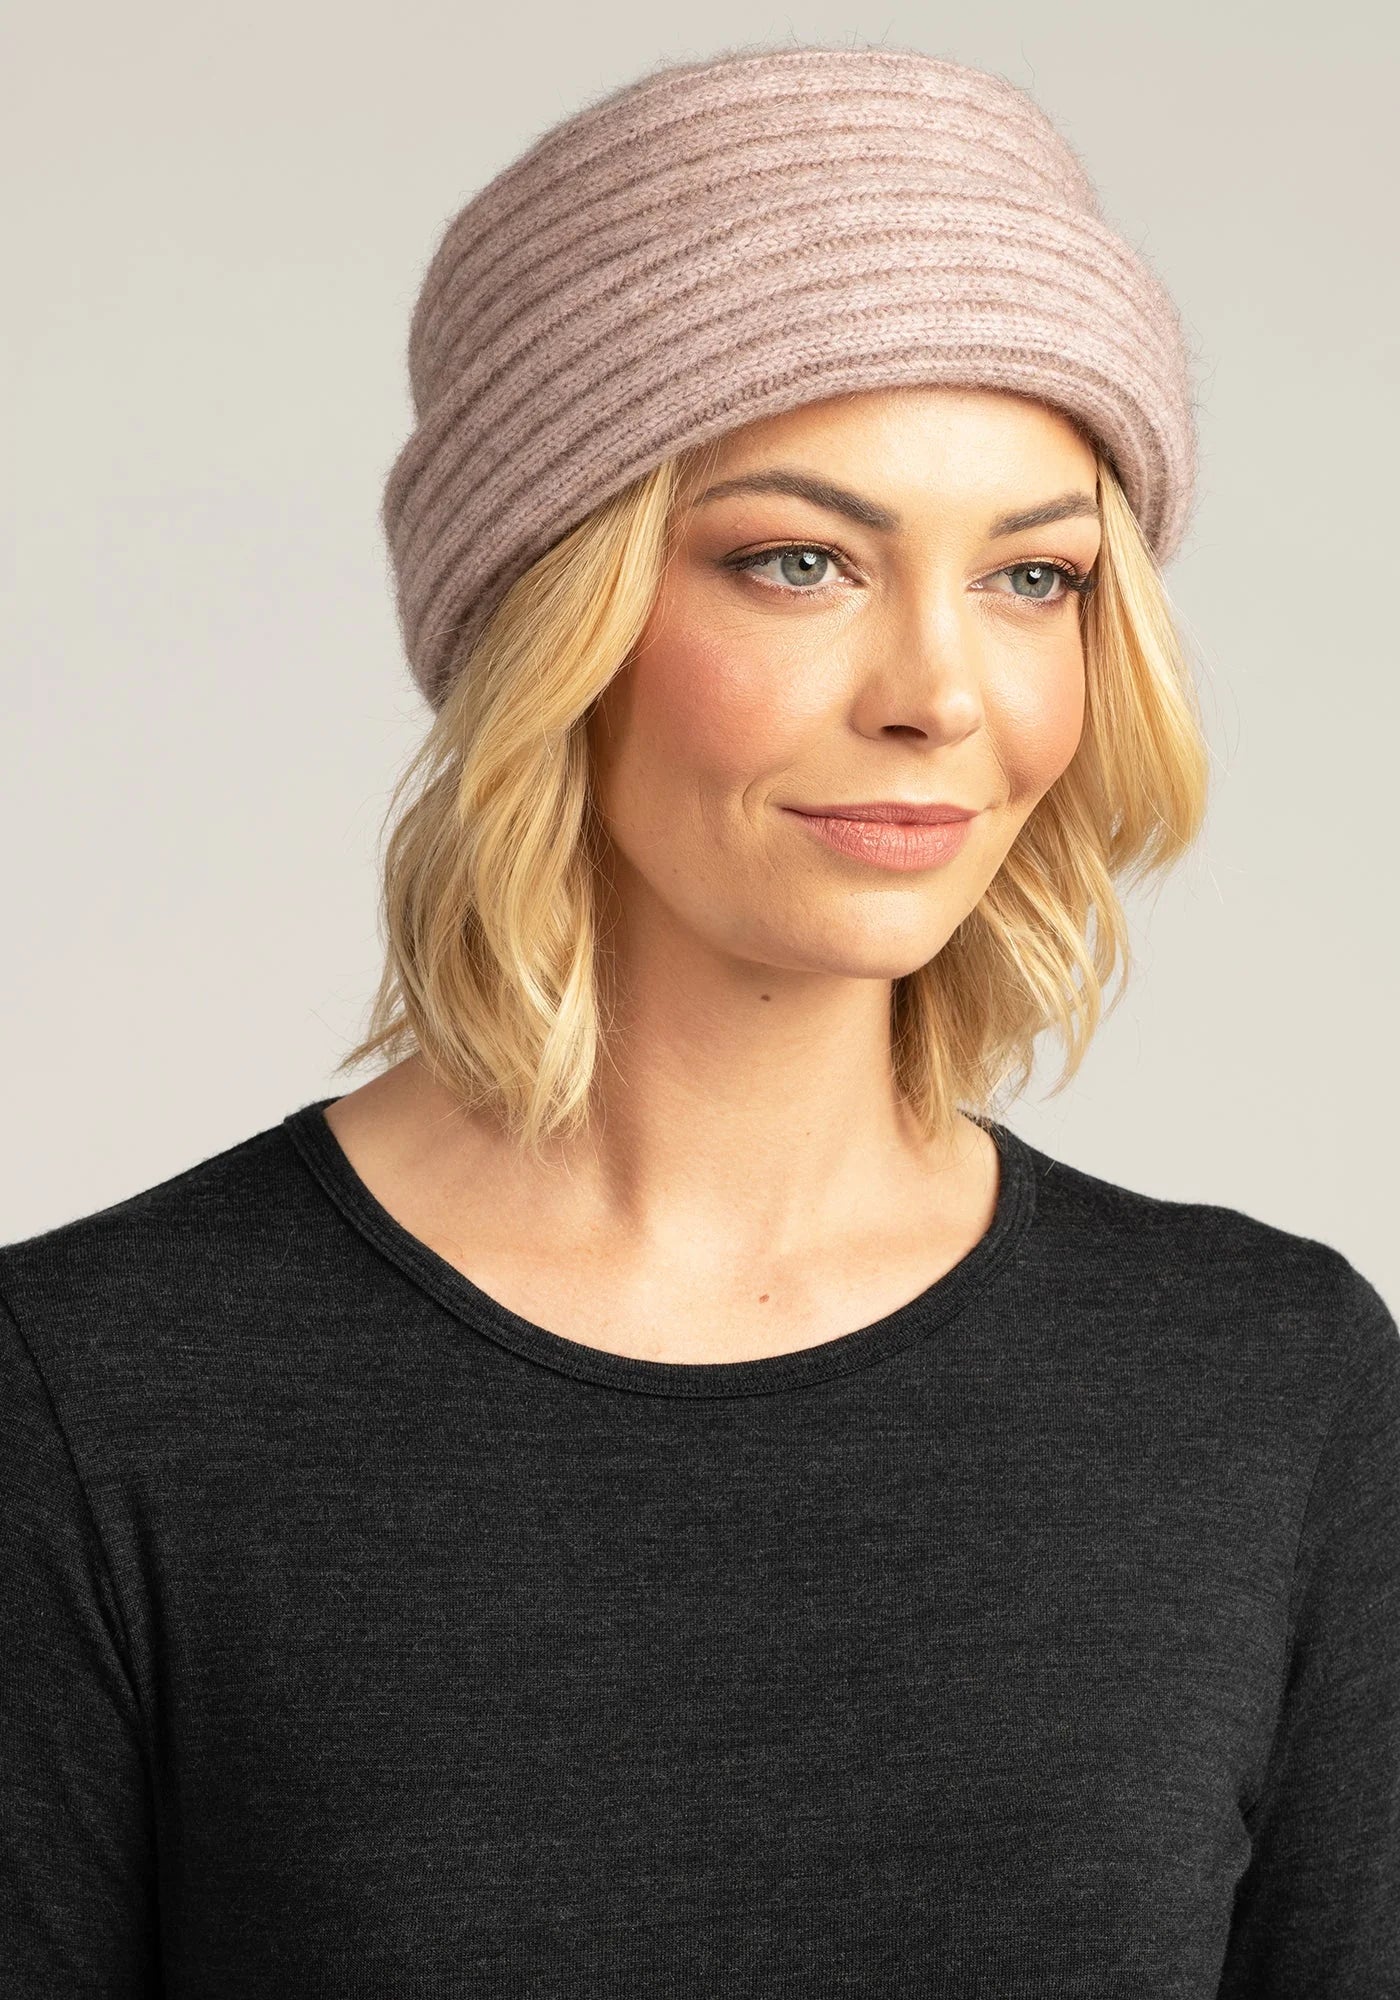 Stay cozy in style with our Merino Knit Hat. Soft, light pink beanie for warmth and fashion-forward flair. Shop now!